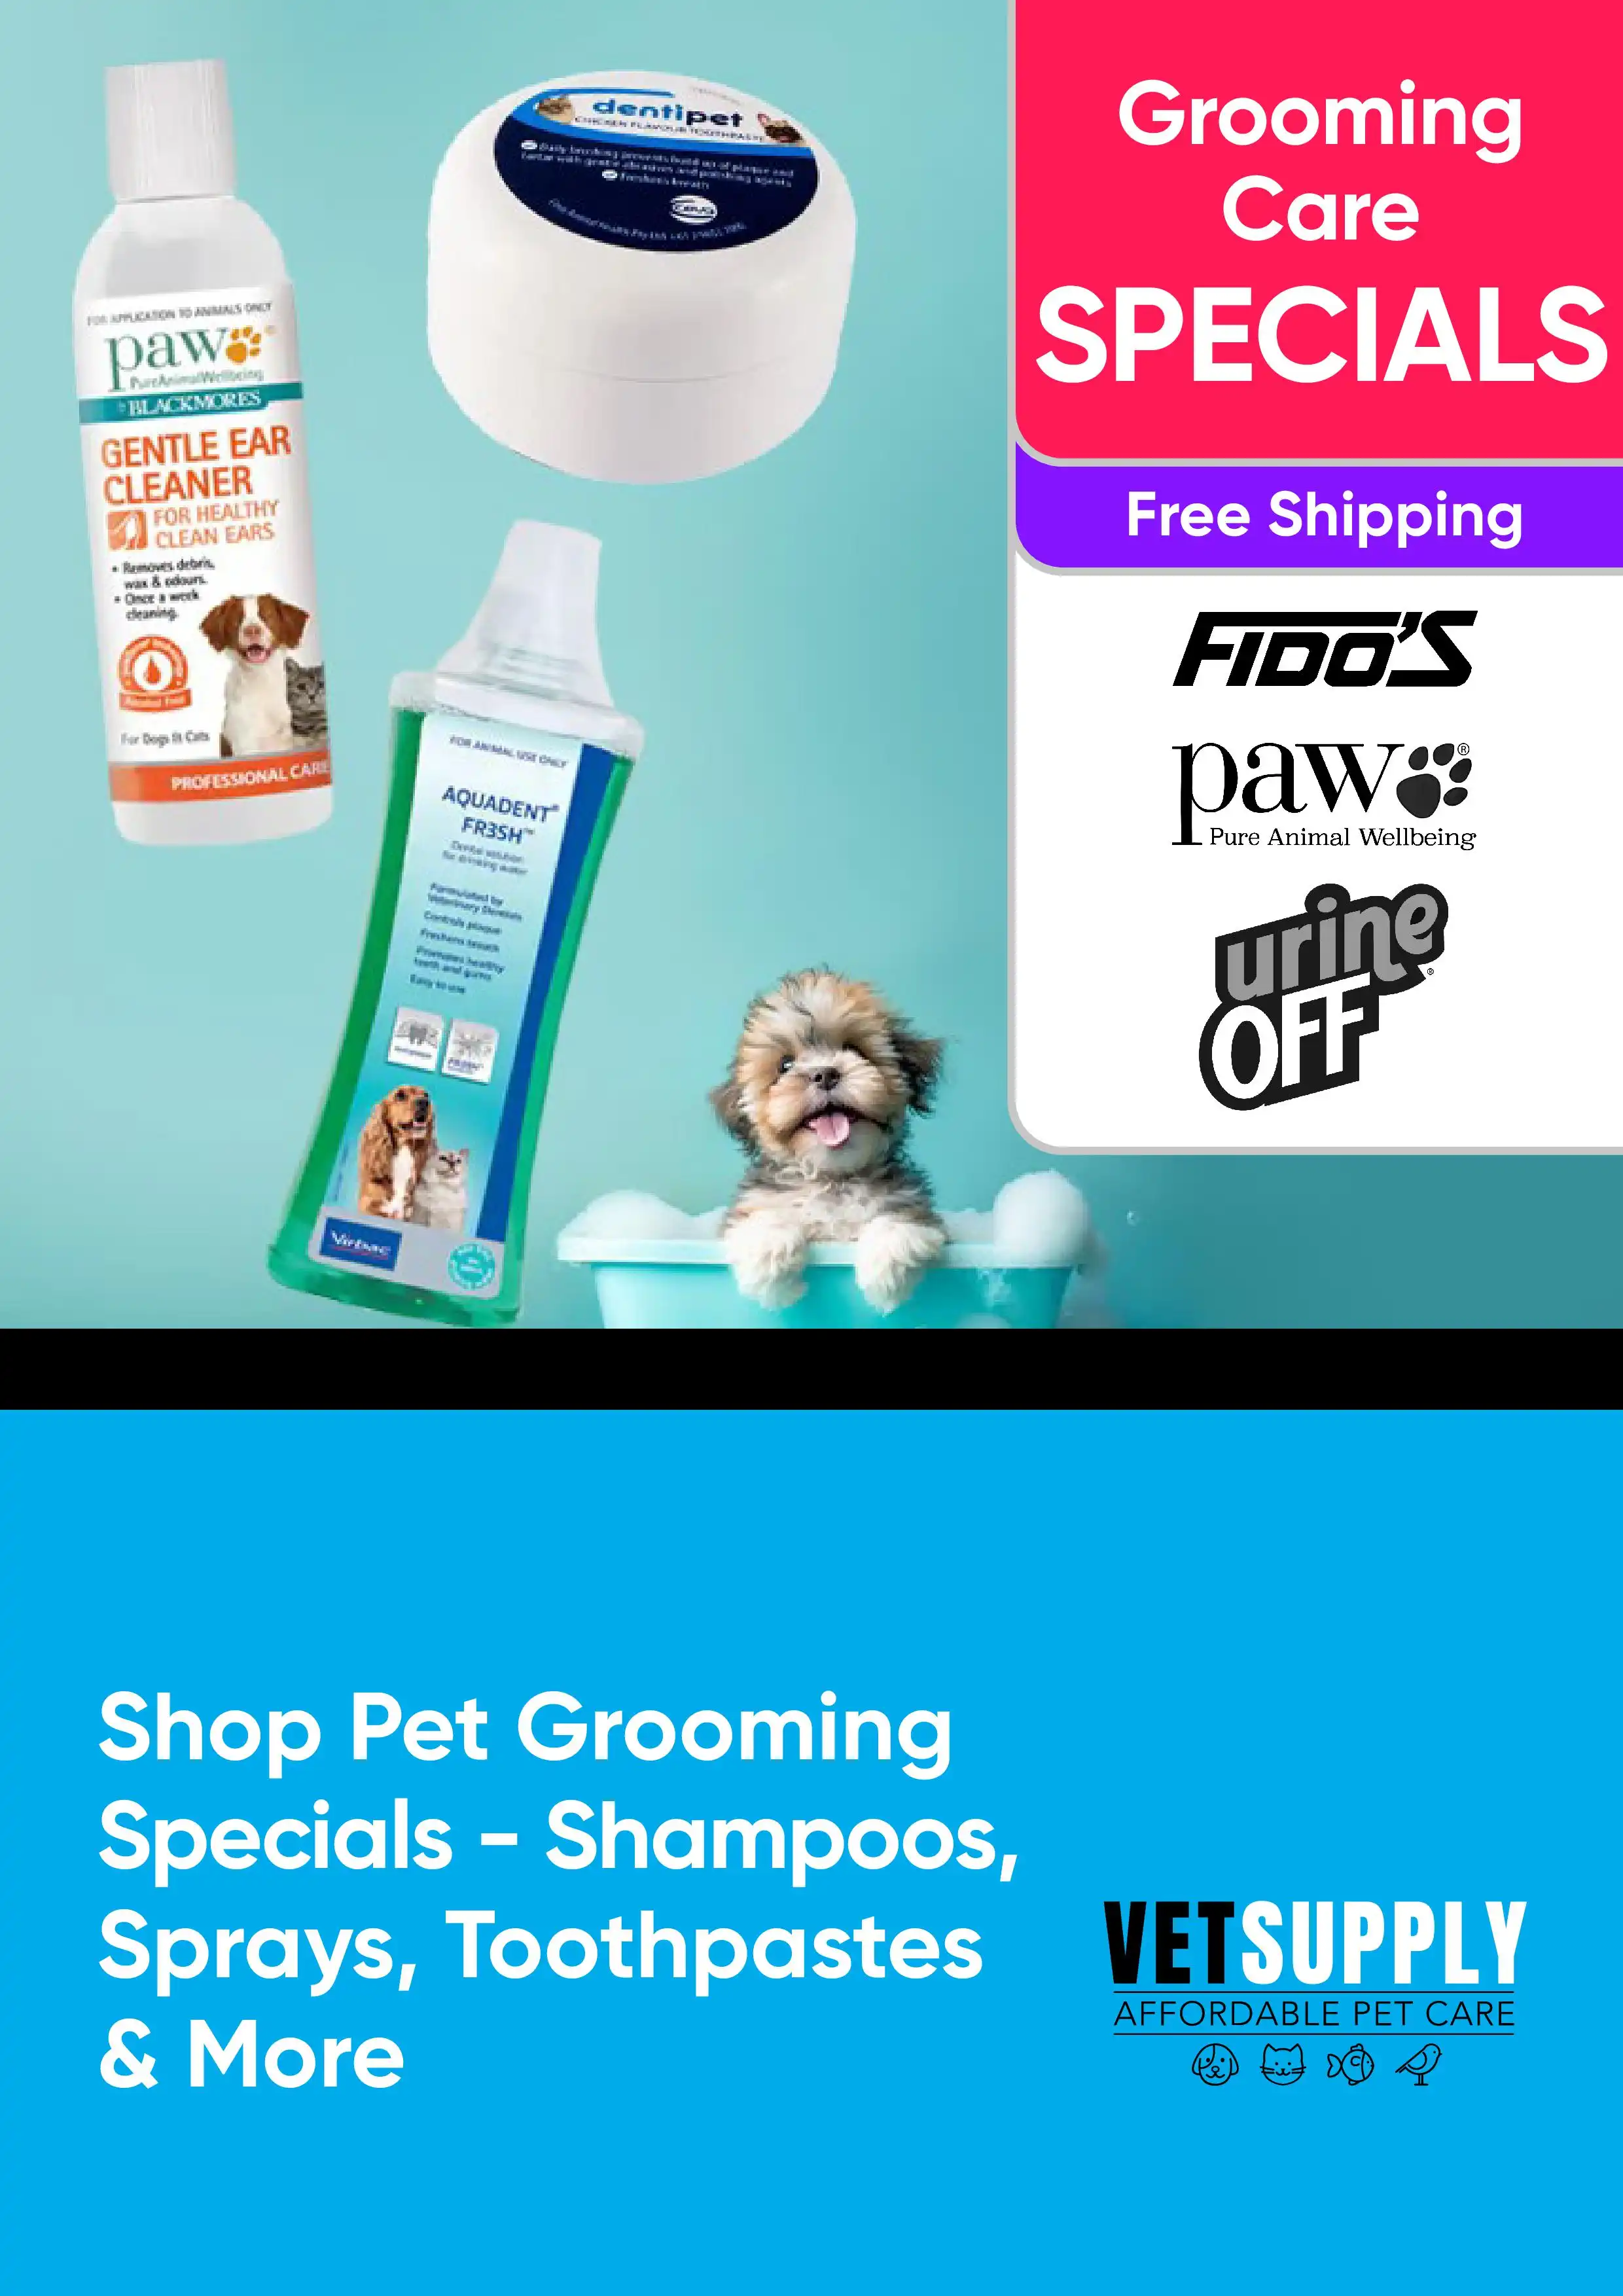 Shop Pet Grooming Specials - Shampoos, Sprays, Toothpastes and More